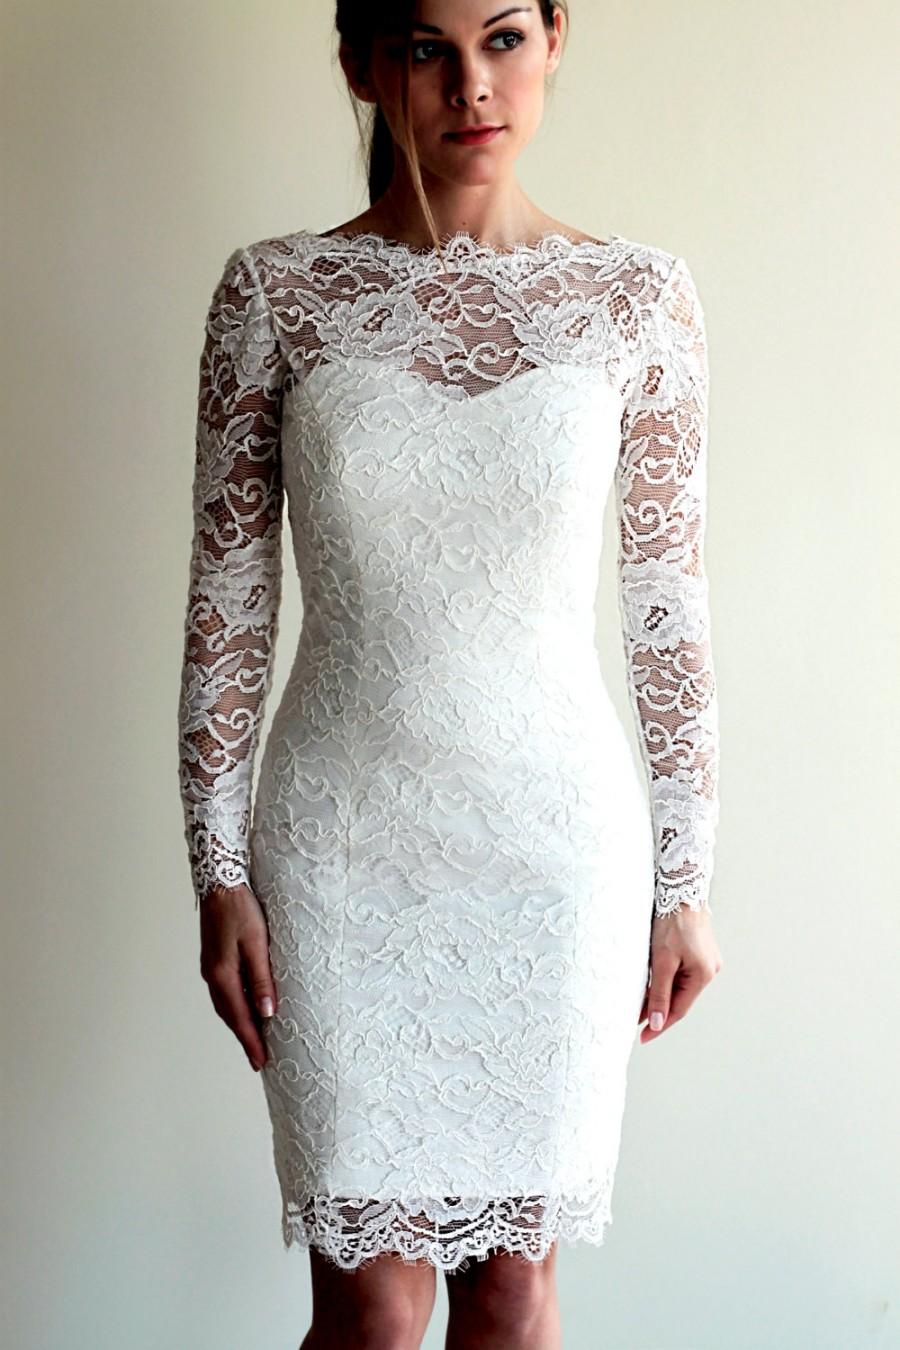 Wedding - Short Wedding Dress with Sleeves and Illusion Neckline and Illusion Back, Reception Lace Dress, See-through Lace Dress